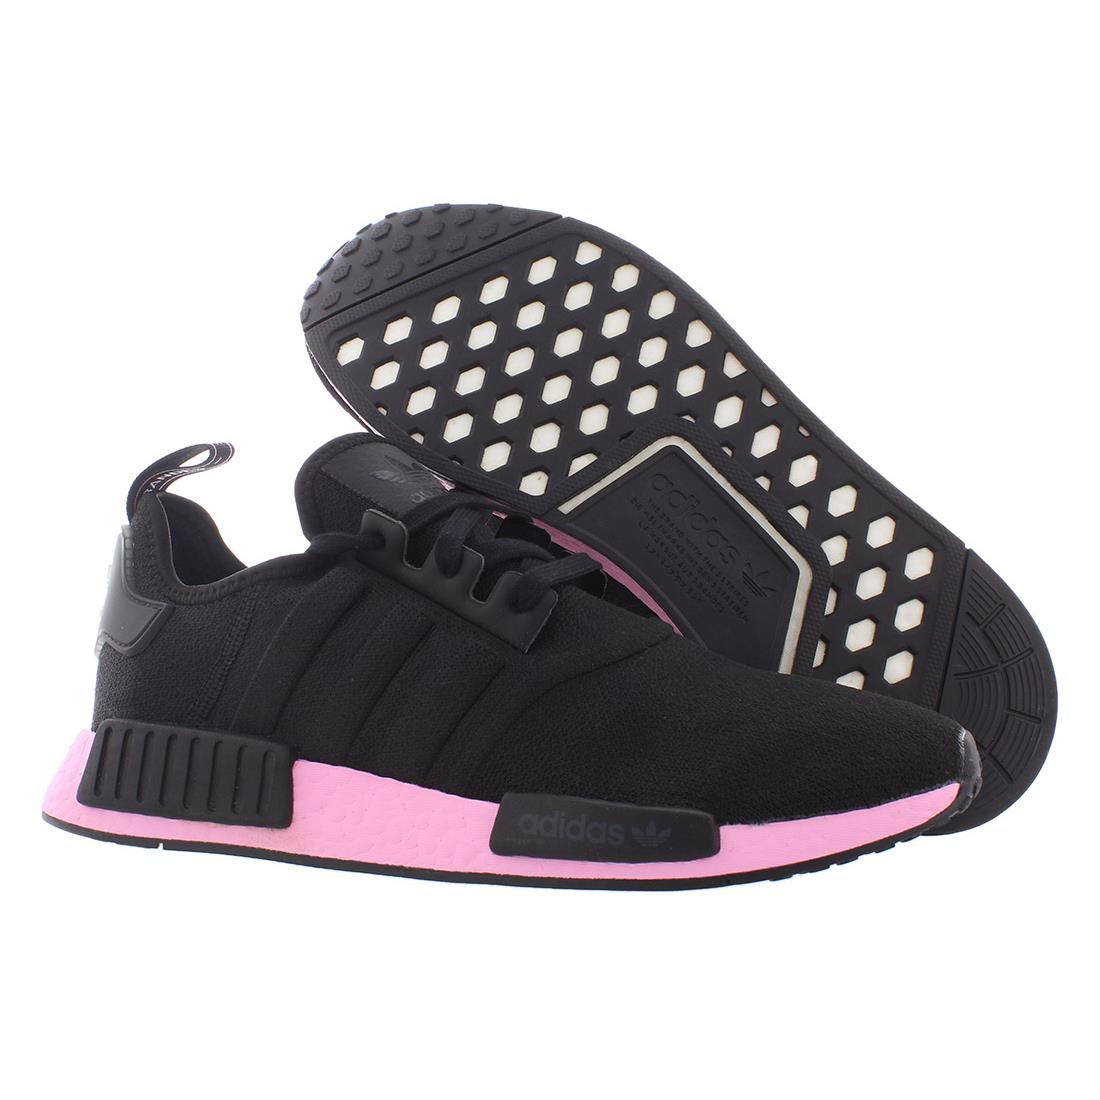 Adidas Nmd_R1 Womens Shoes Size 11 Color: Black